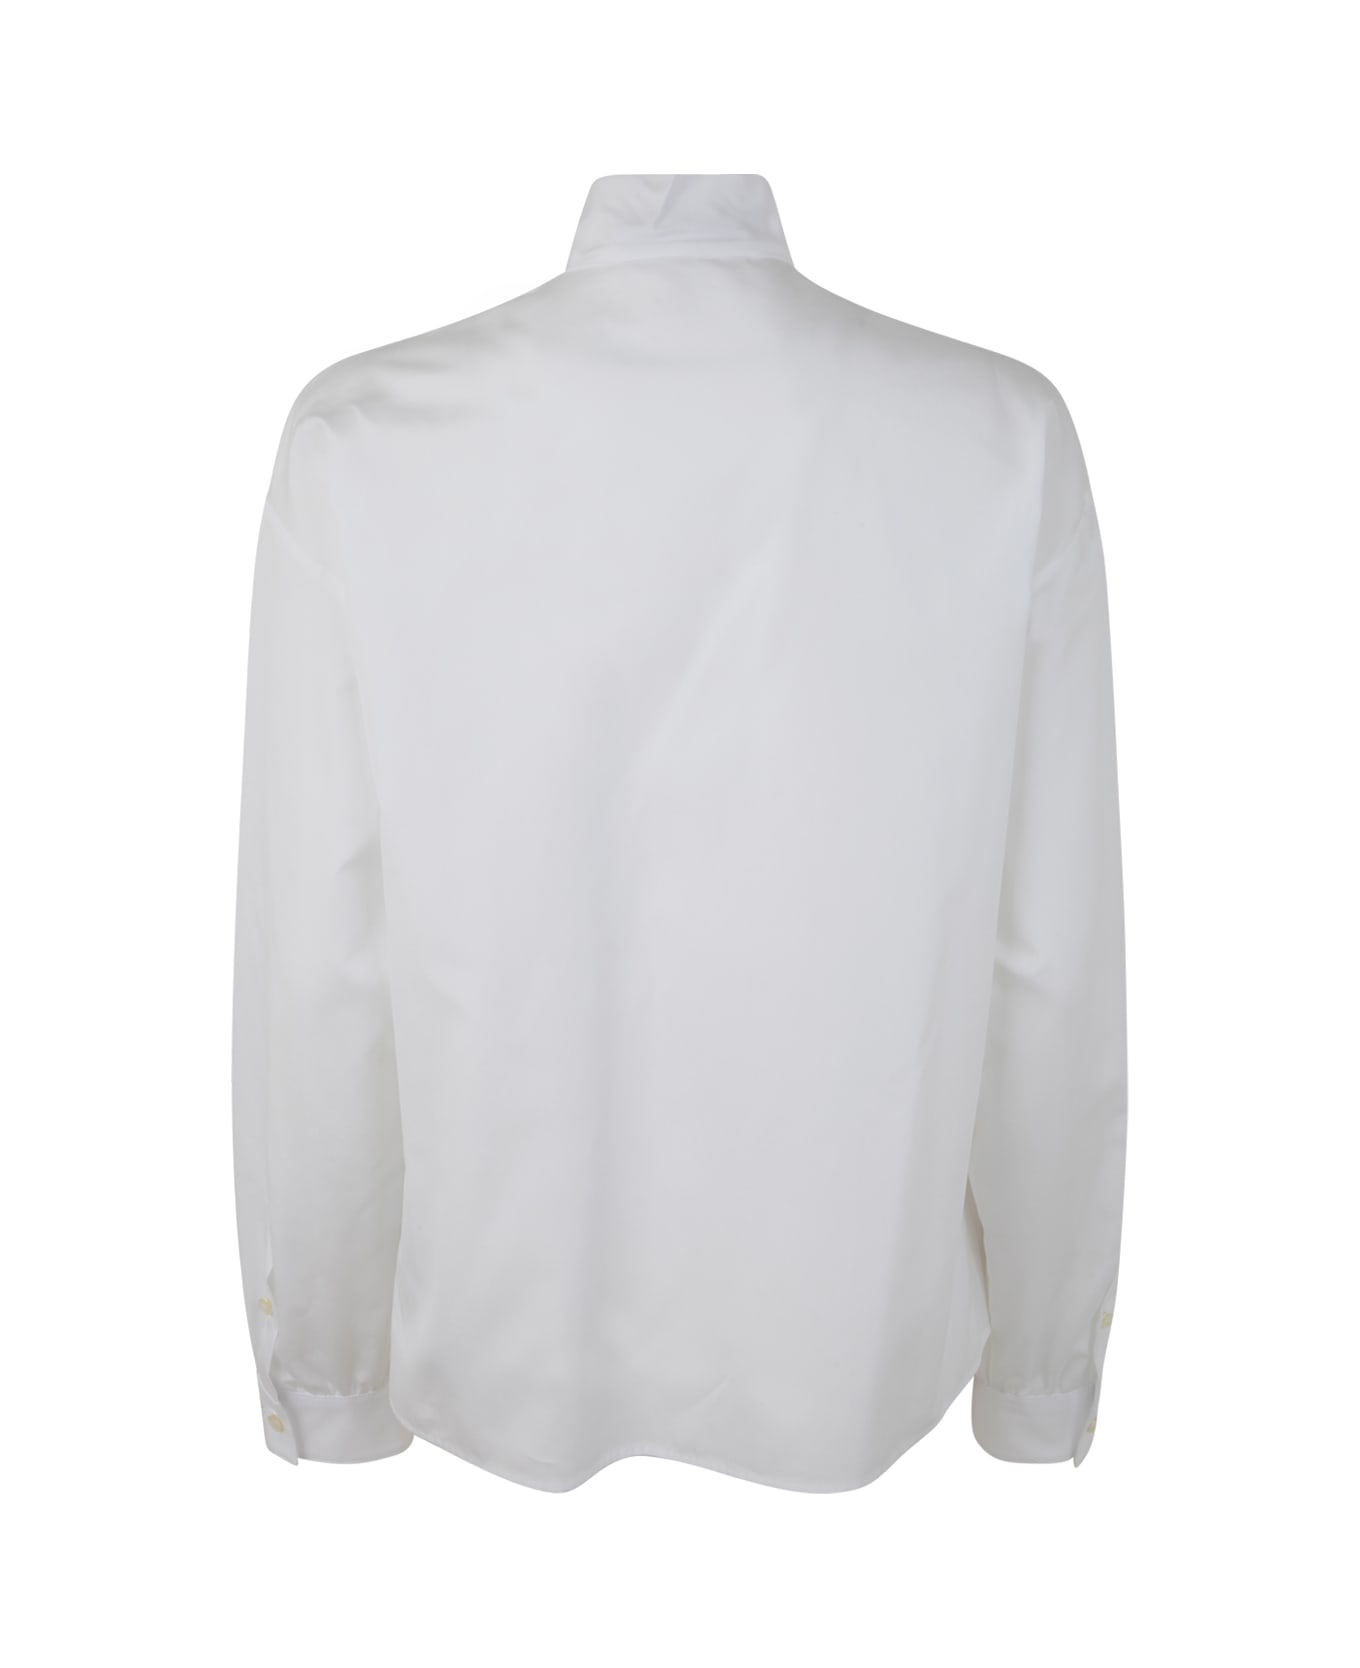 Dsquared2 Knotted Collar Shirt - White